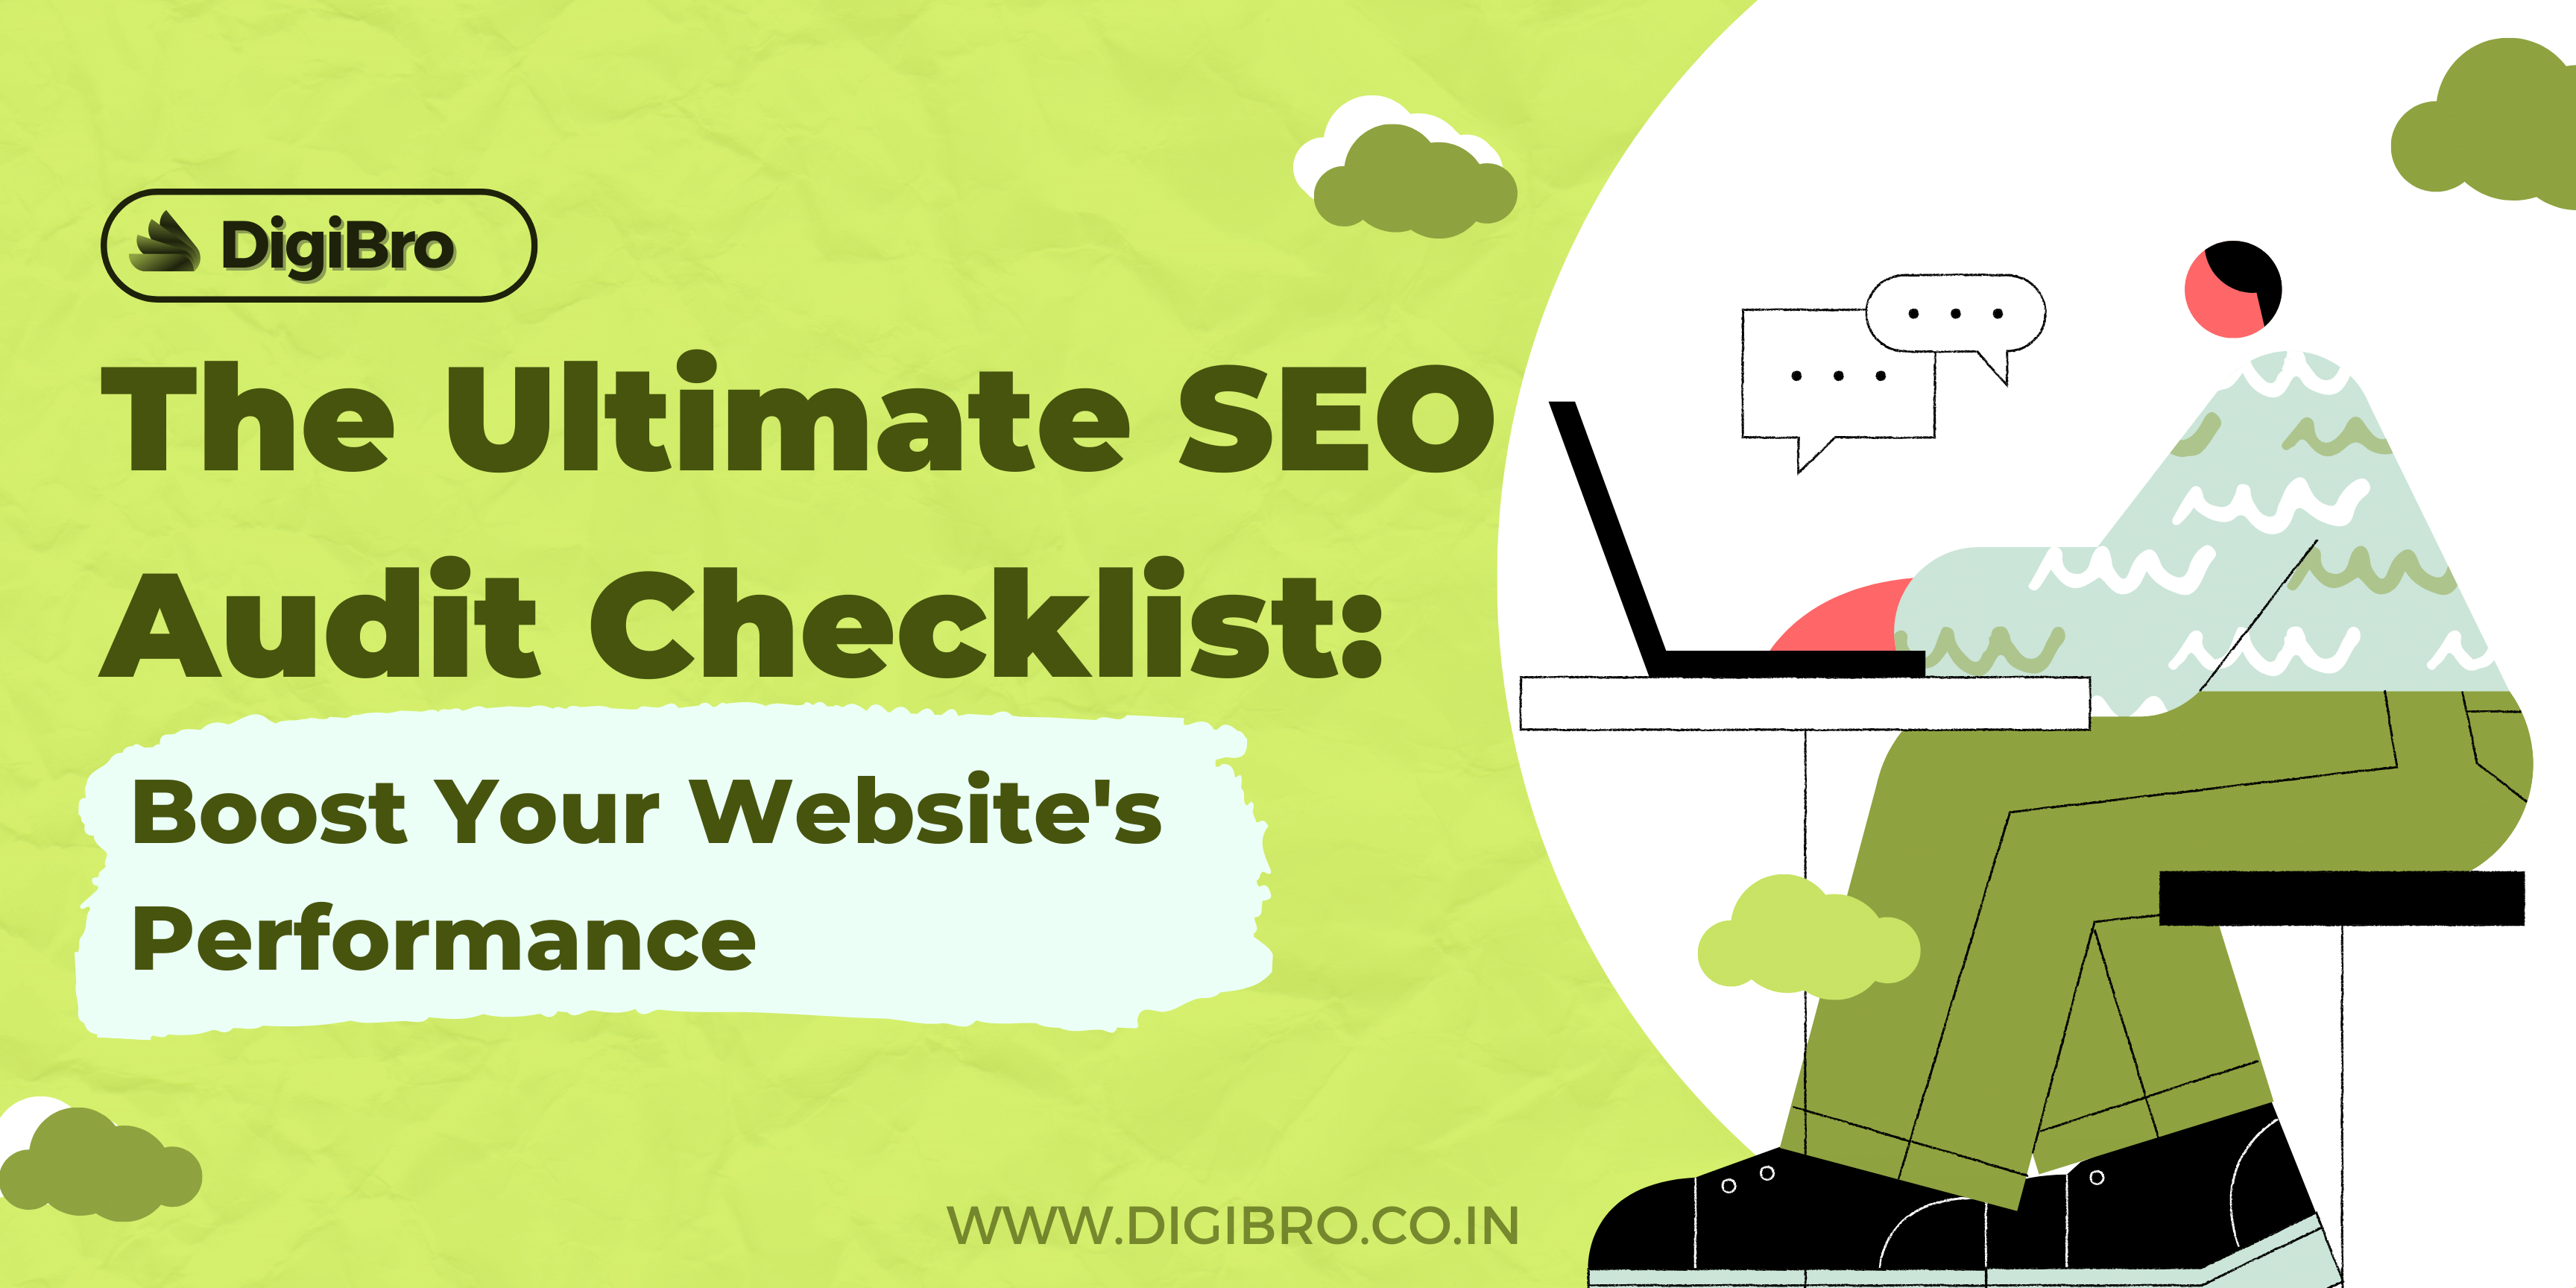 "The Ultimate SEO Audit Checklist - Boost Your Website's Performance" image displaying a comprehensive list of essential factors to consider when performing an SEO audit. The checklist includes headings such as website structure, content, keywords, backlinks, technical aspects, and analytics, among others. This visual aid can assist website owners and SEO professionals in evaluating their website's SEO performance and identifying areas for improvement. Designed by Graphics team of Digibro